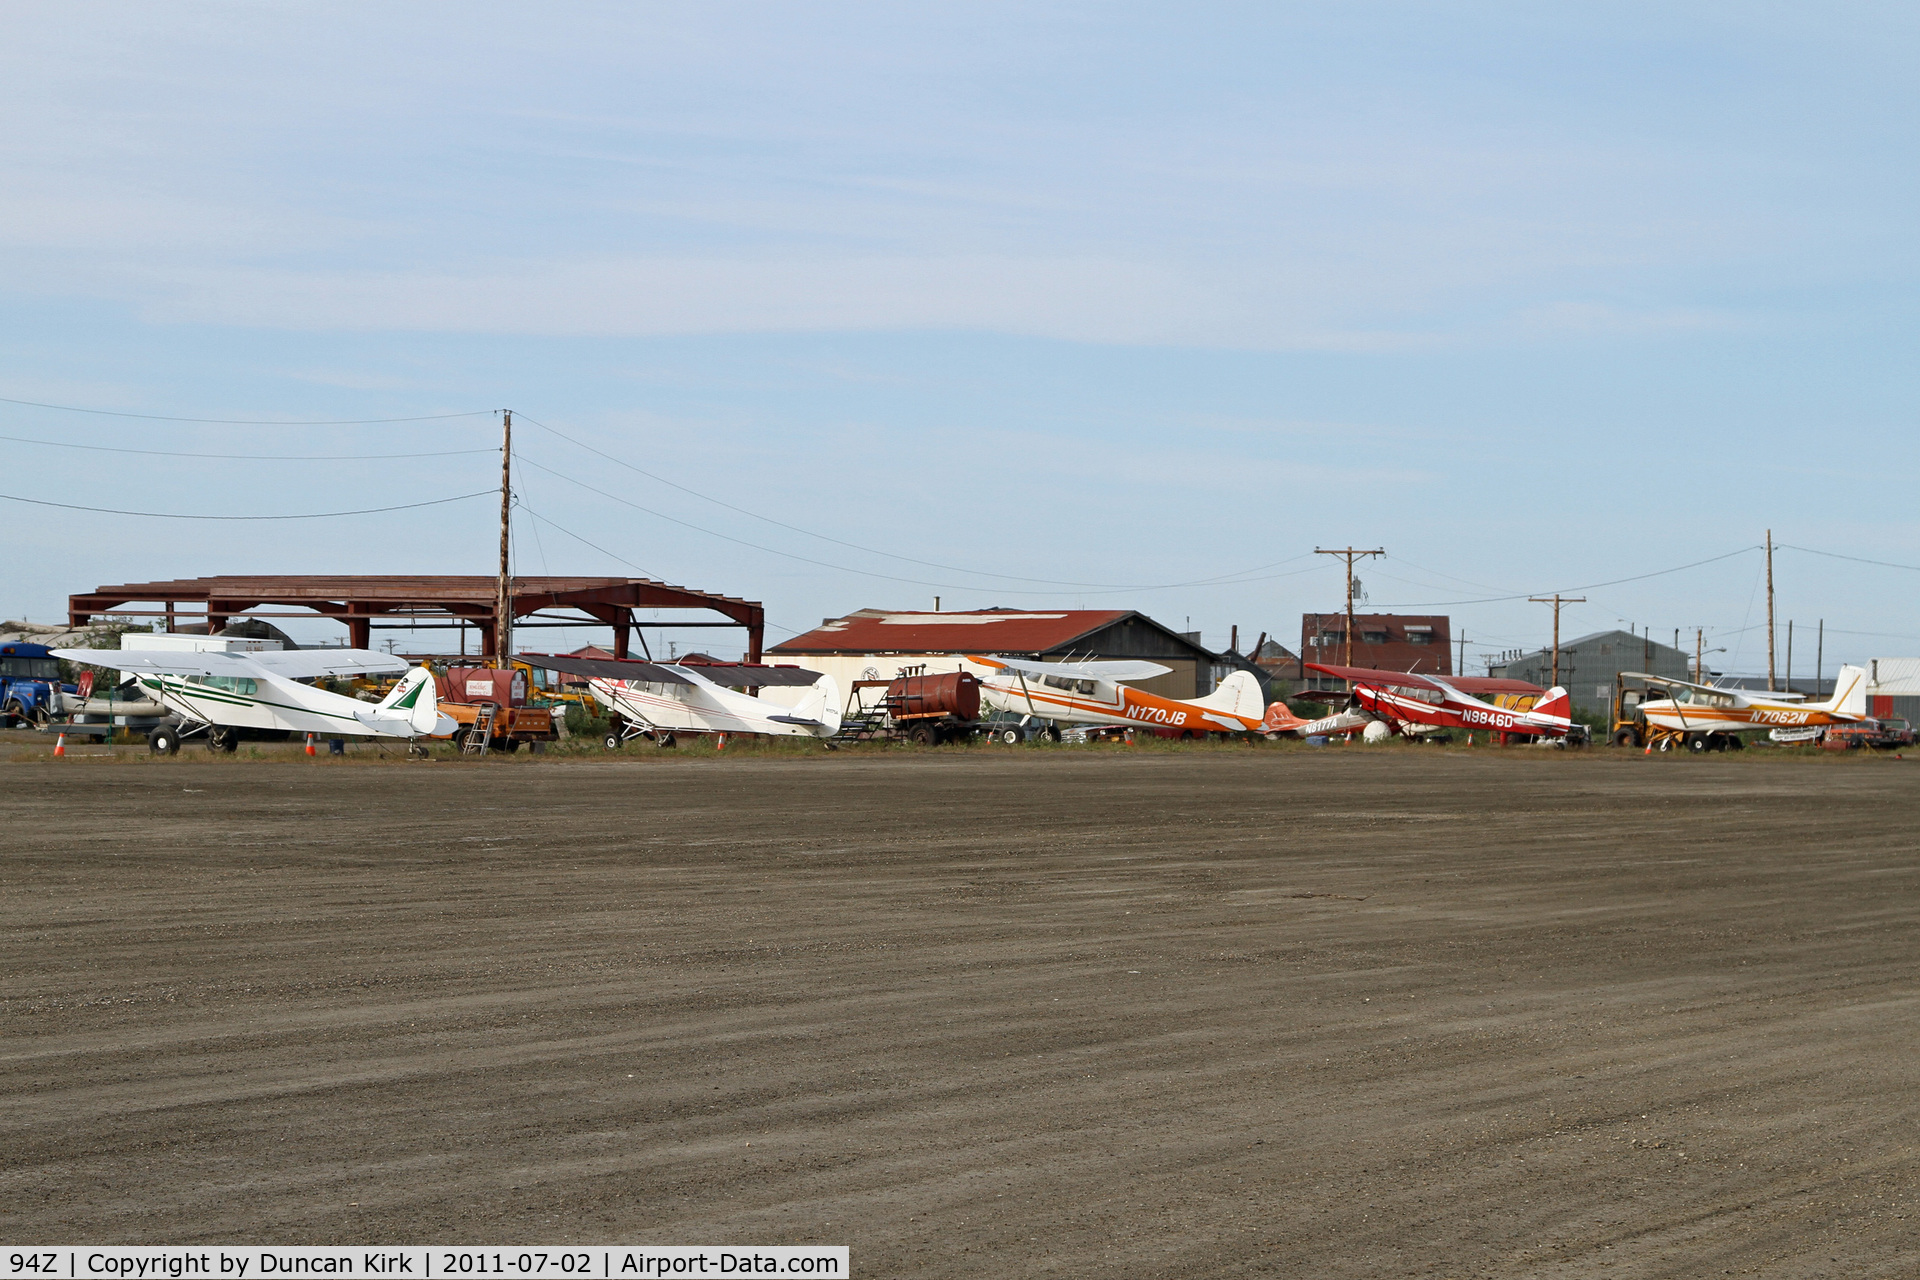 Nome City Field Airport (94Z) - In a city of 3500 this is the second airport, It has about 30 residents.